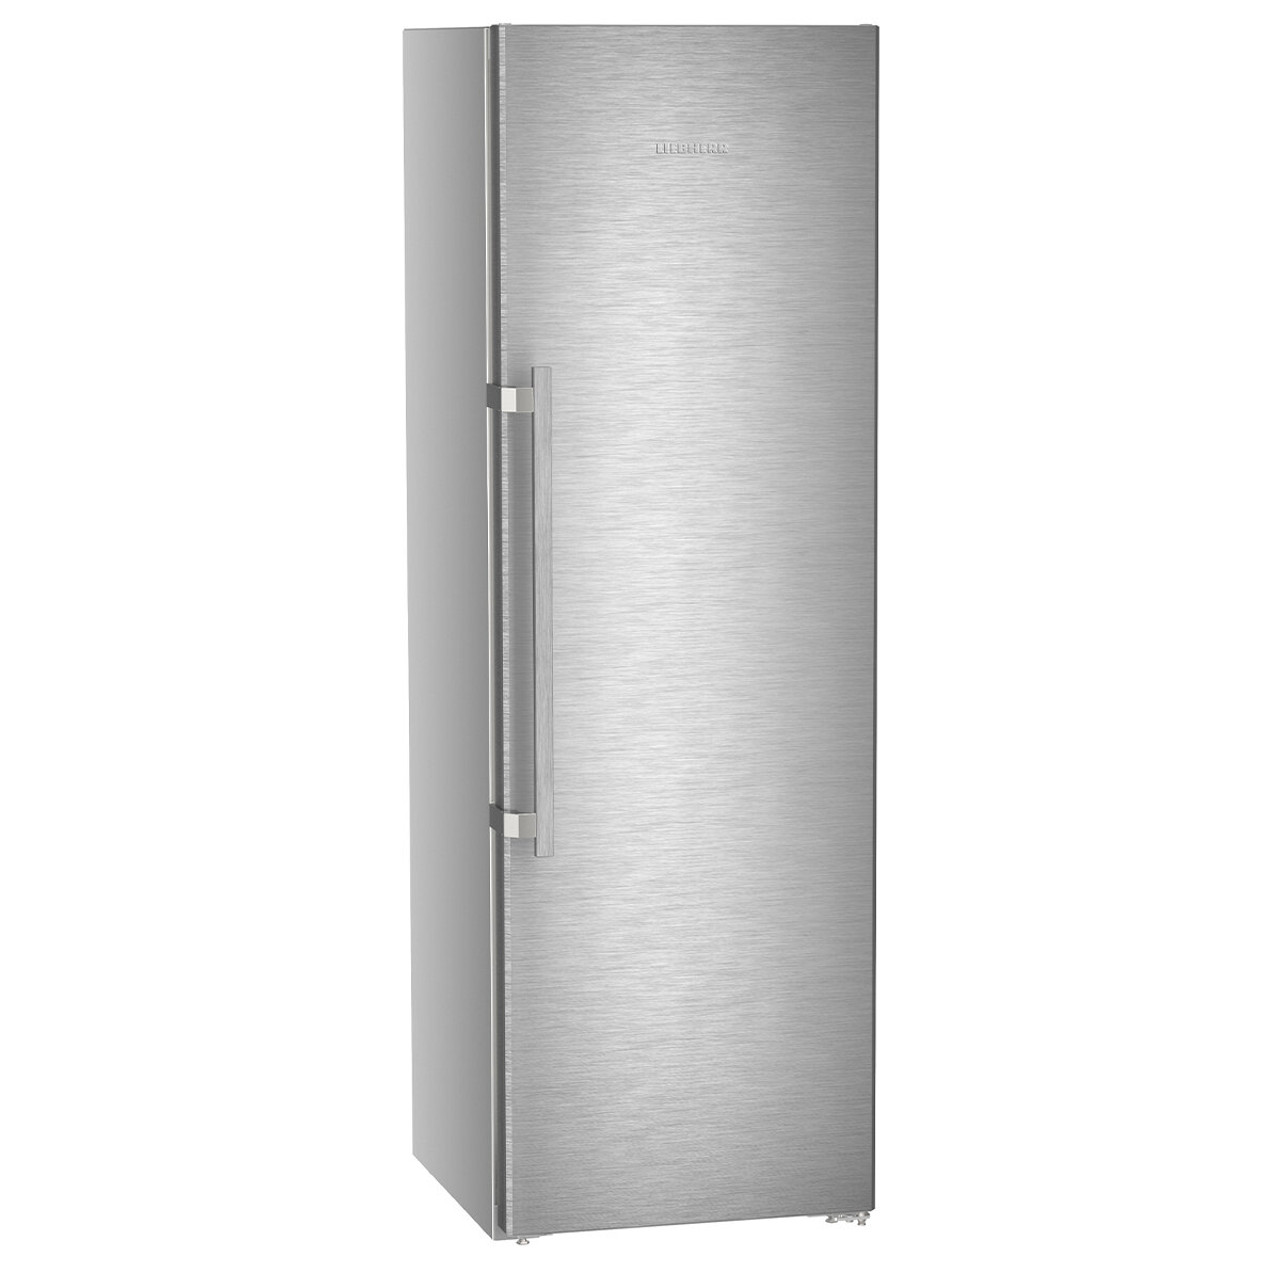 SRSDH5220 - 332L Upright Fridge With Easyfresh And Supercool - Stainless Steel